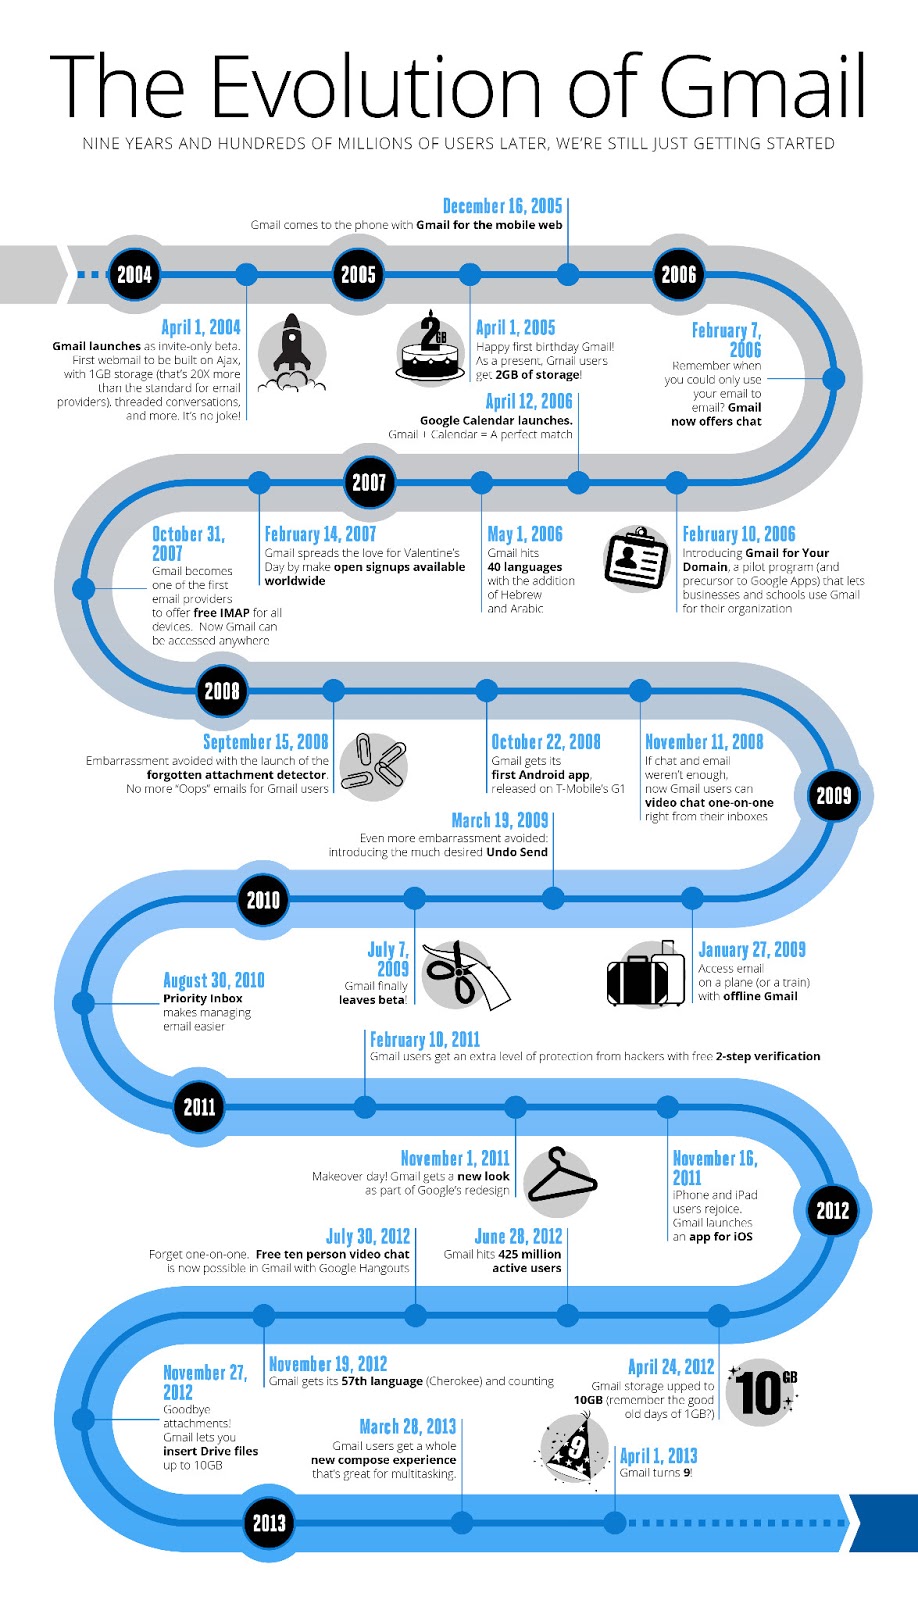 The Evolution of Gmail [Infographic]